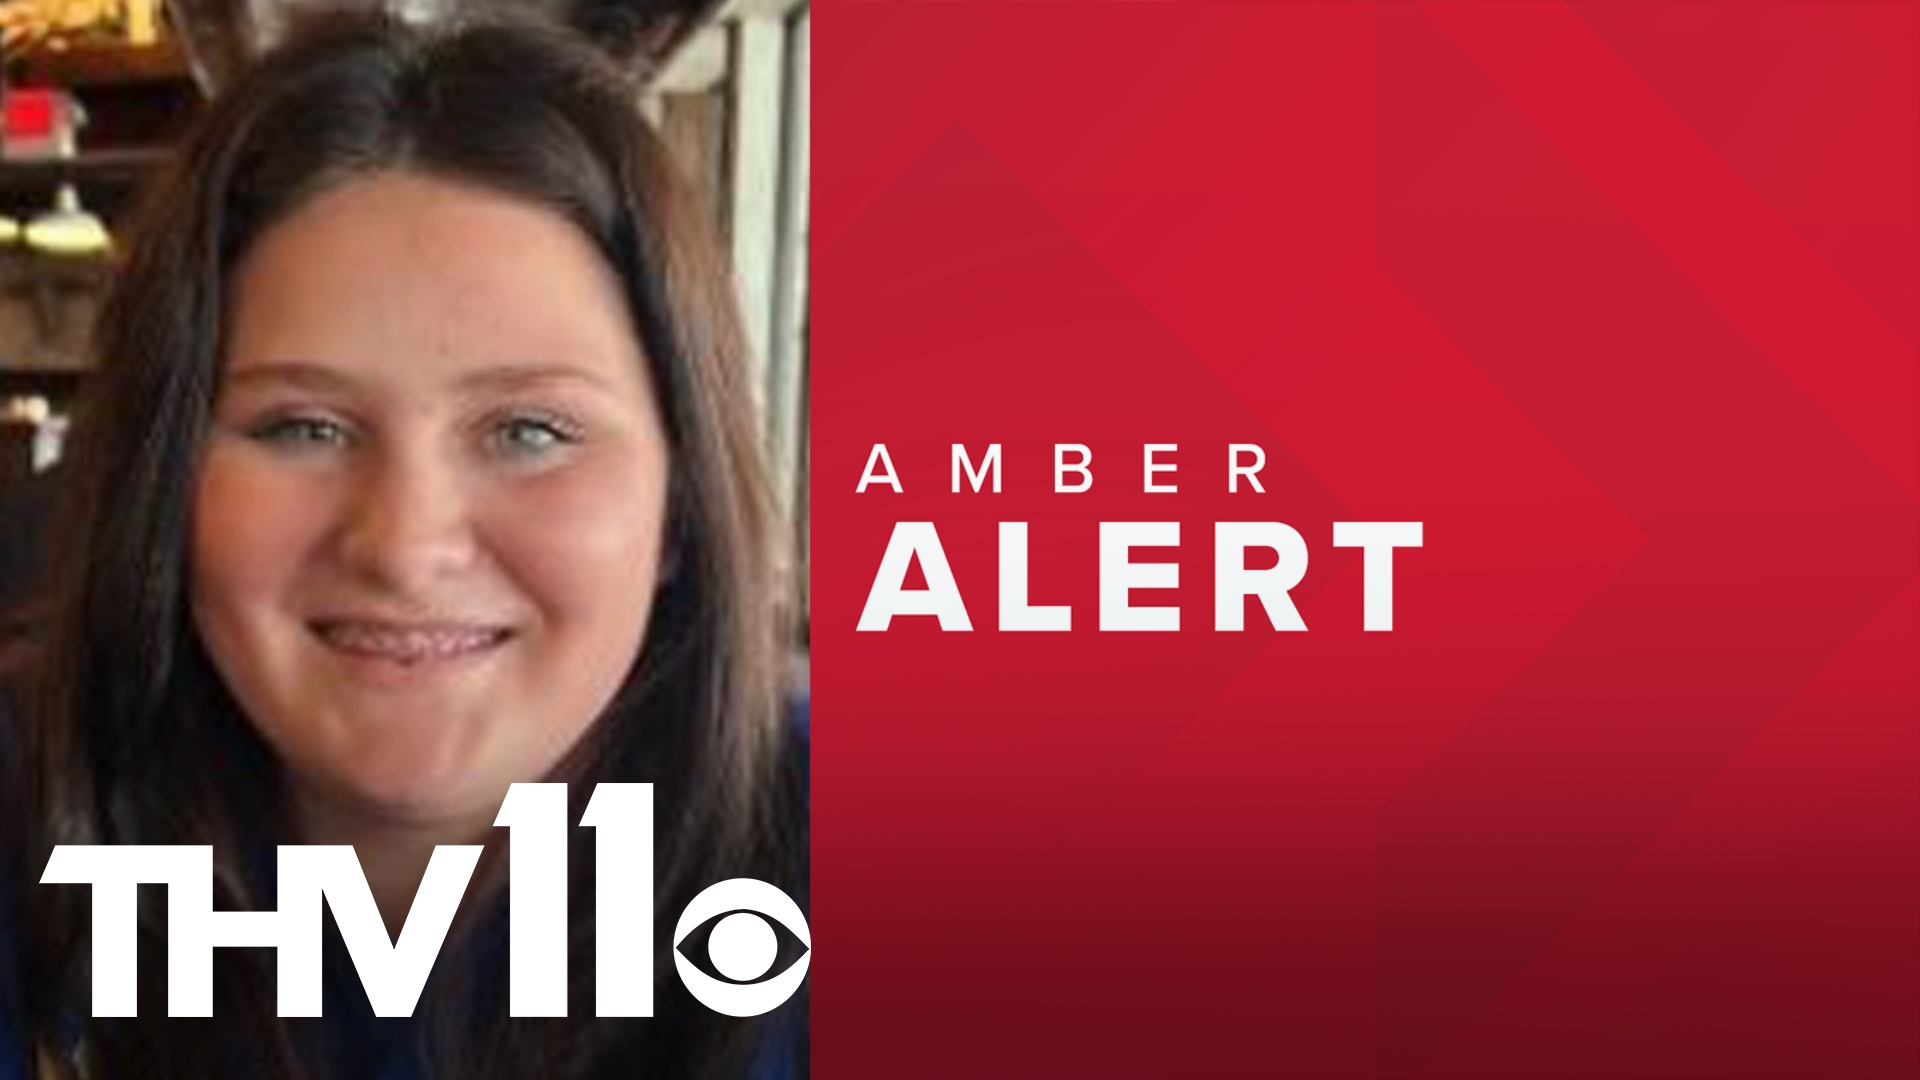 Arkansas State Police says that the Crawford County Sheriff's Office requested activation of the alert for 14-year-old Abbey Jolynn Force.